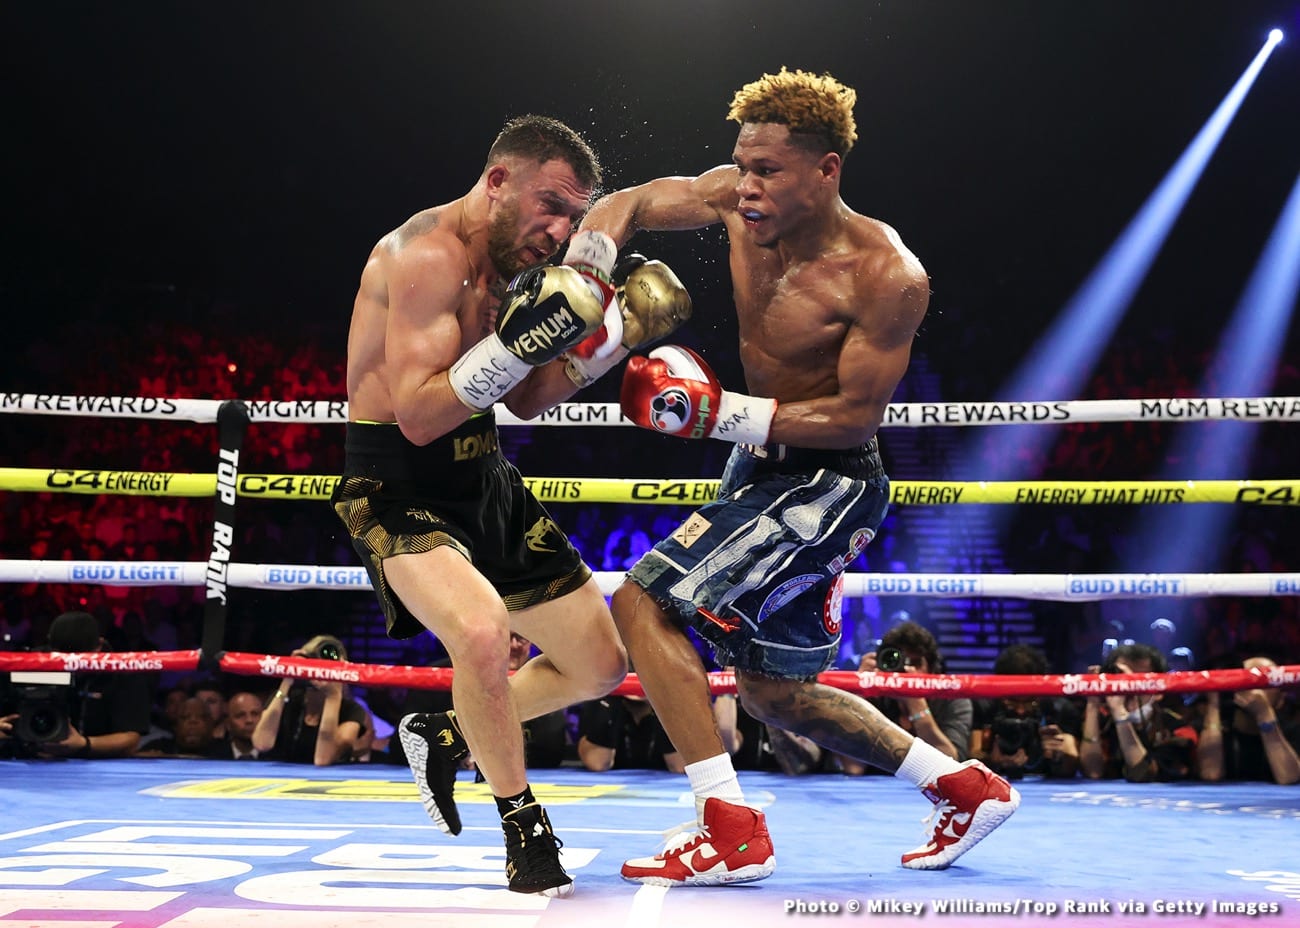 Devin Haney beats Lomachenko by close decision - Boxing results